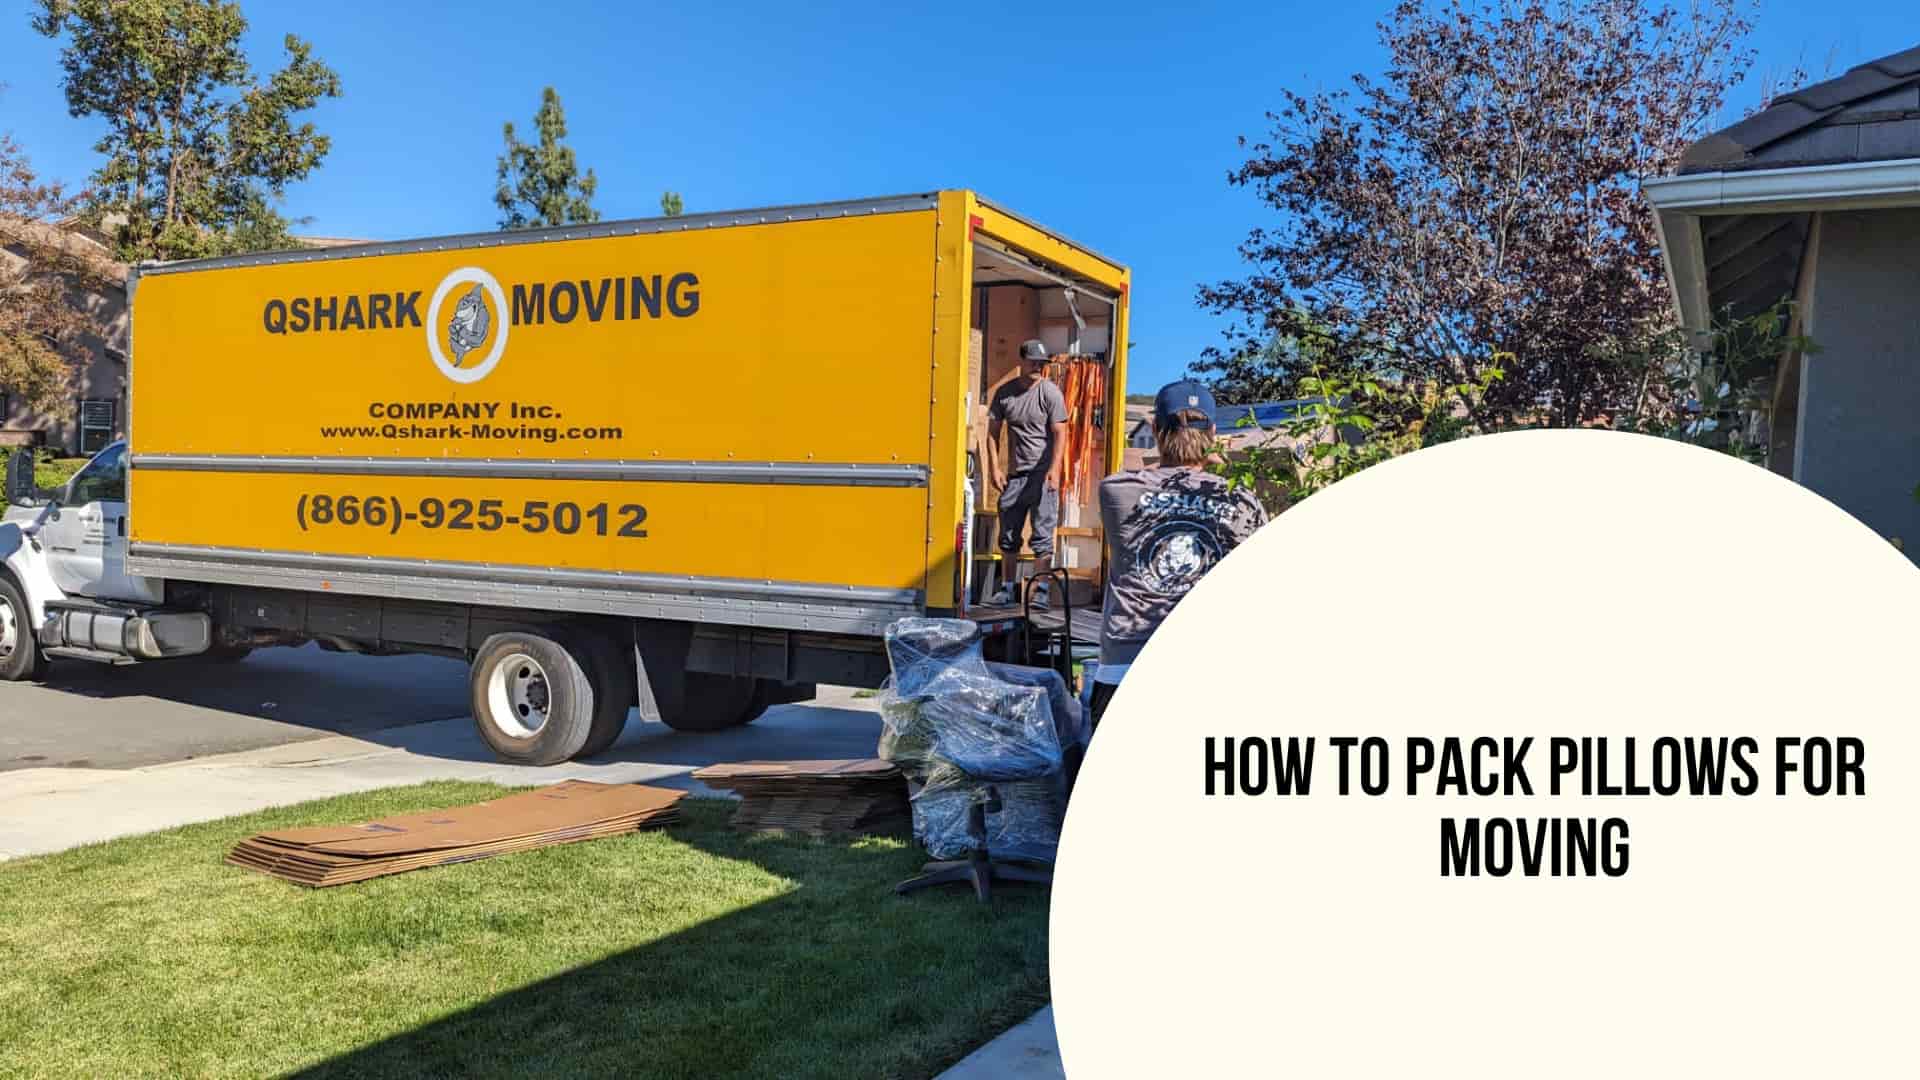 How to Pack Pillows for Moving